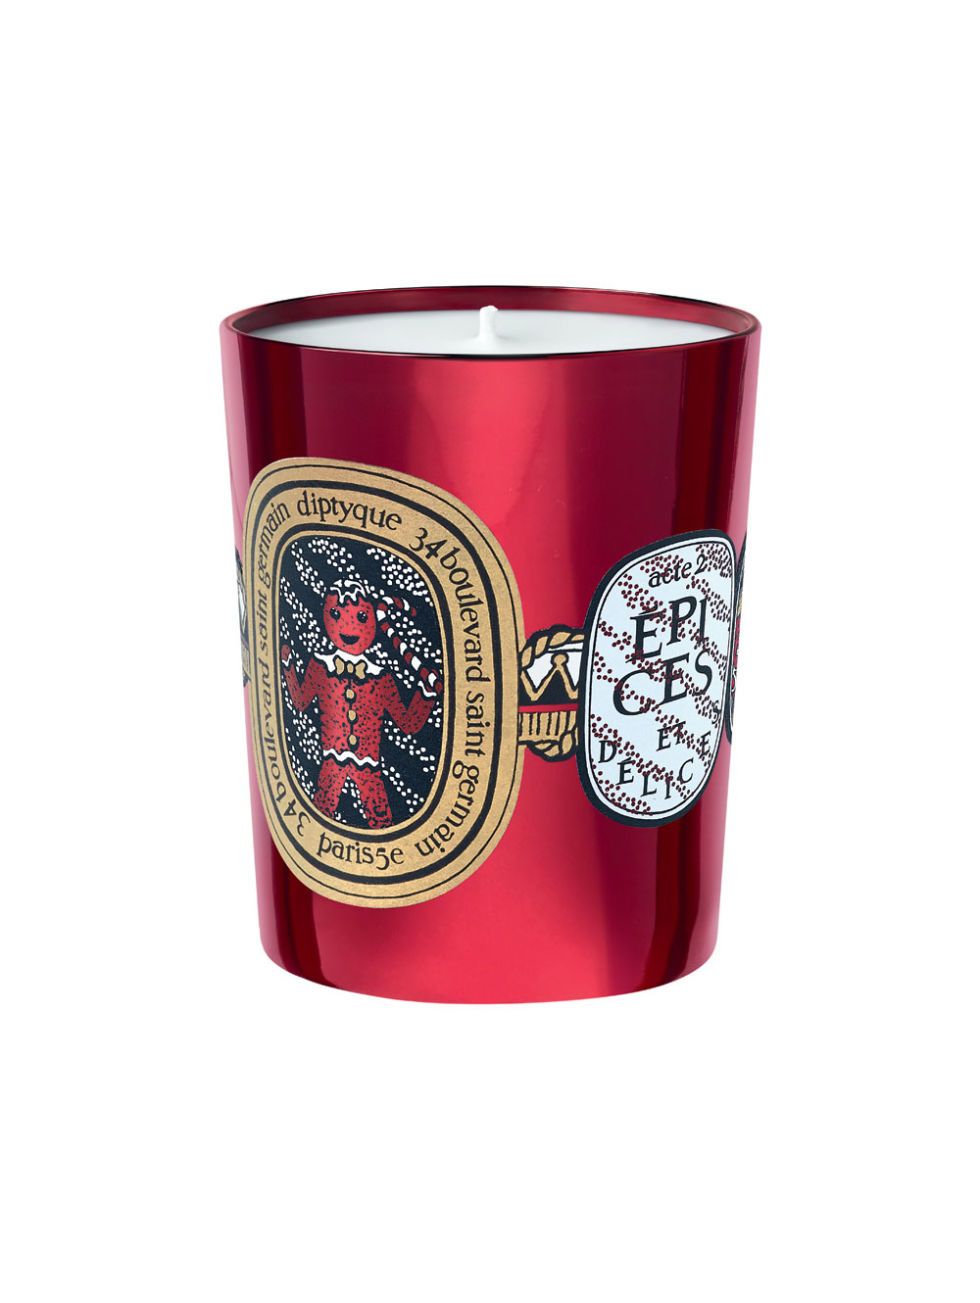 <p>Diptyque Holiday Collection geurkaars, € 60 - verkrijgbaar via <a href="http://www.skins.nl/christmas-2016-candle-epices-et-delices.html" target="_blank">skins.nl</a></p>